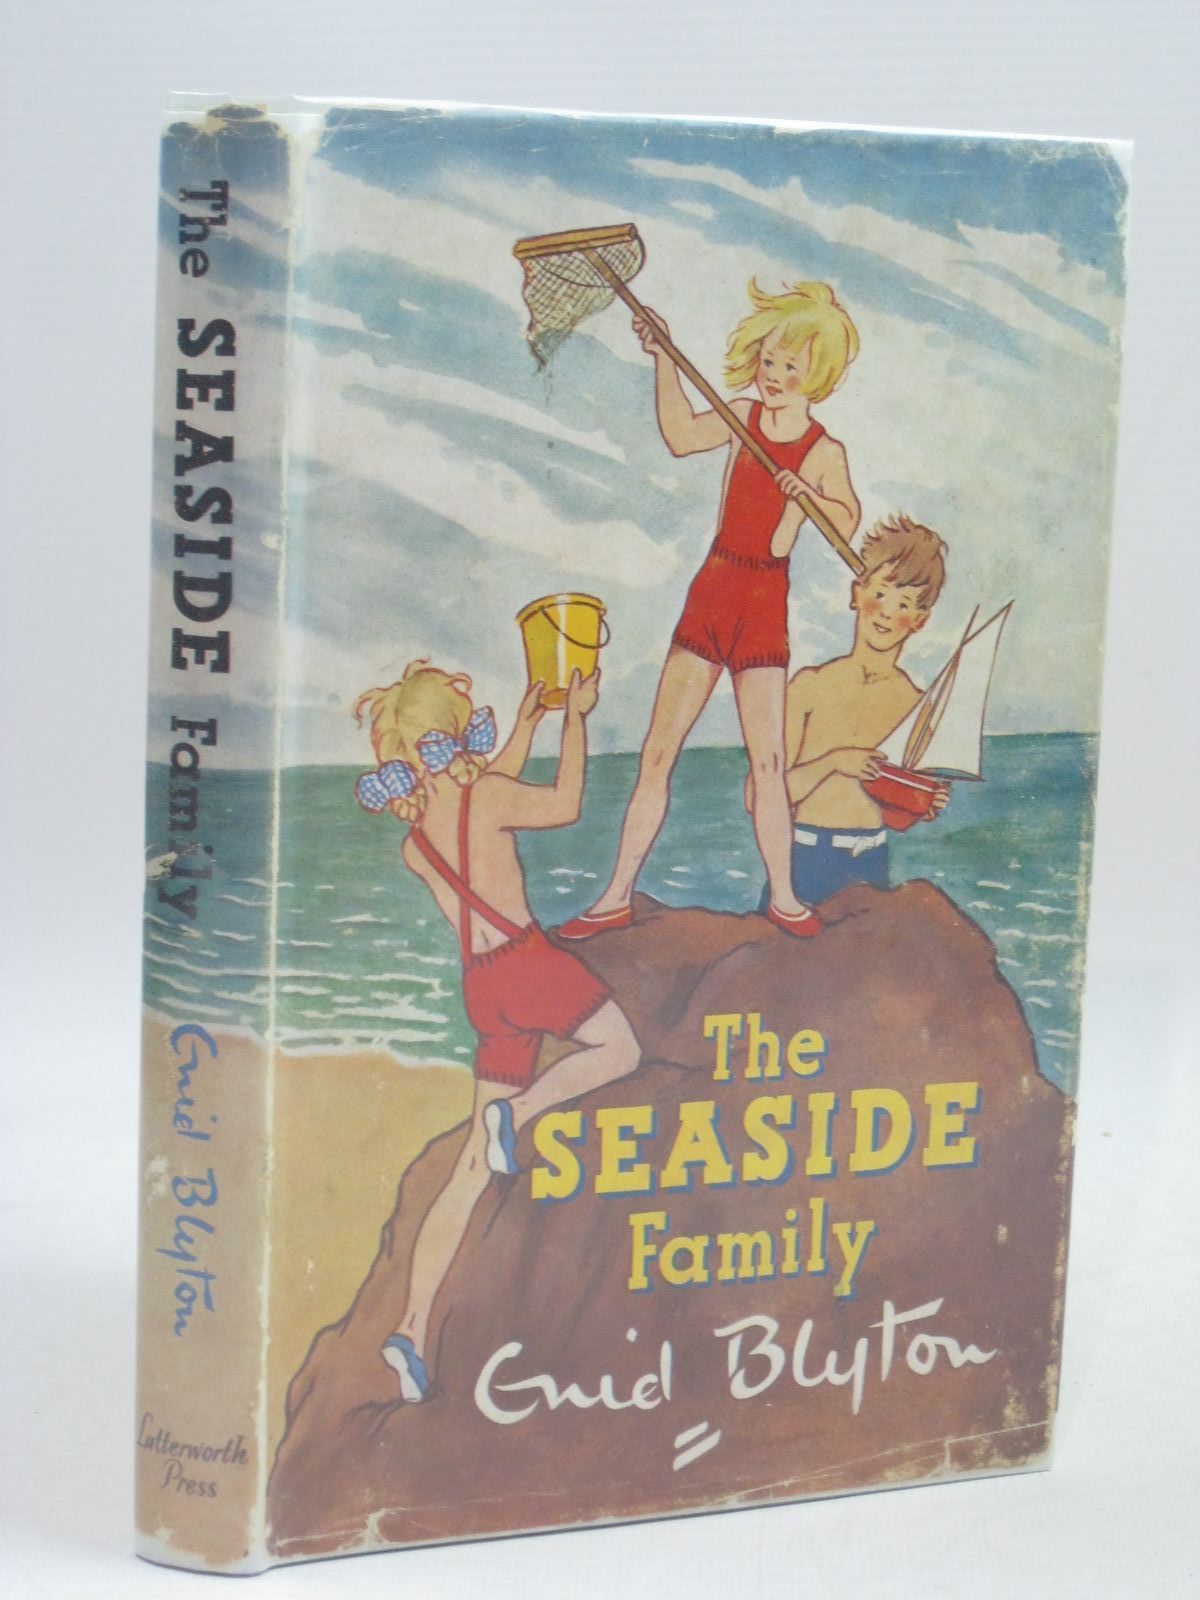 Cover of THE SEASIDE FAMILY by Enid Blyton